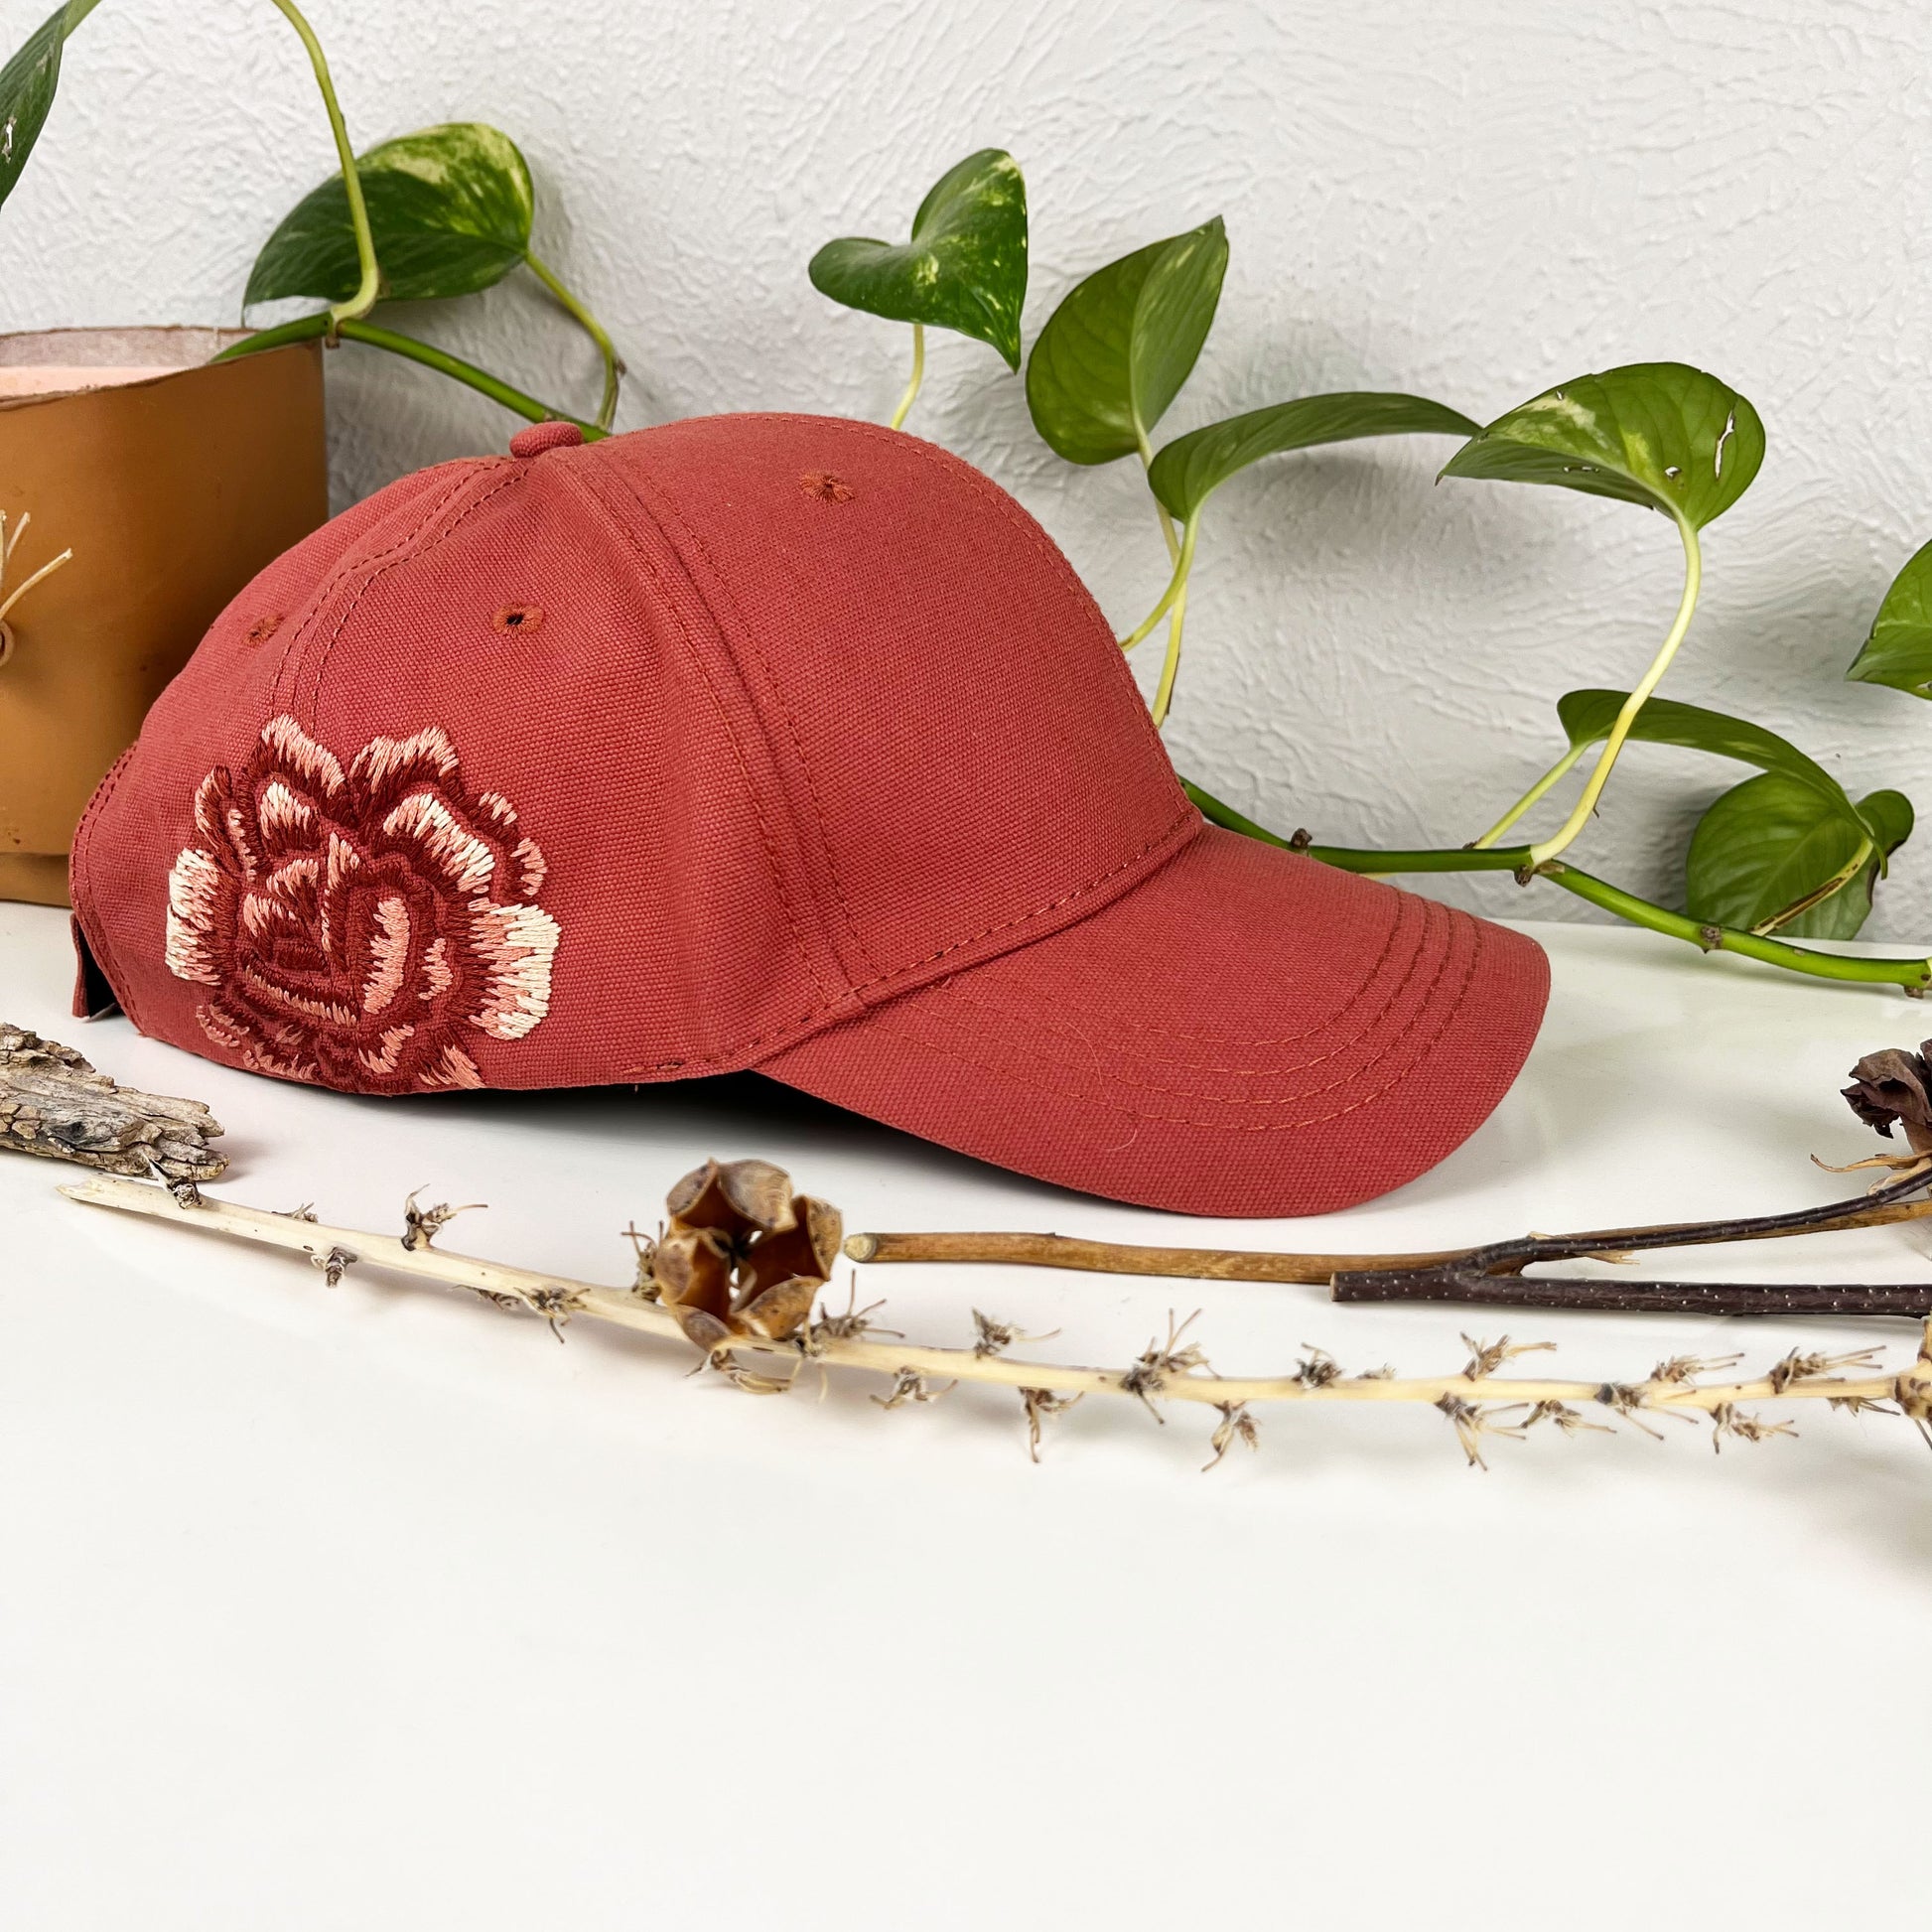 terra cotta colored baseball hat with a large hand embroidered peony on the side, also in shades of terra cotta, sitting on a dresser with a plant vine and dried flowers around it